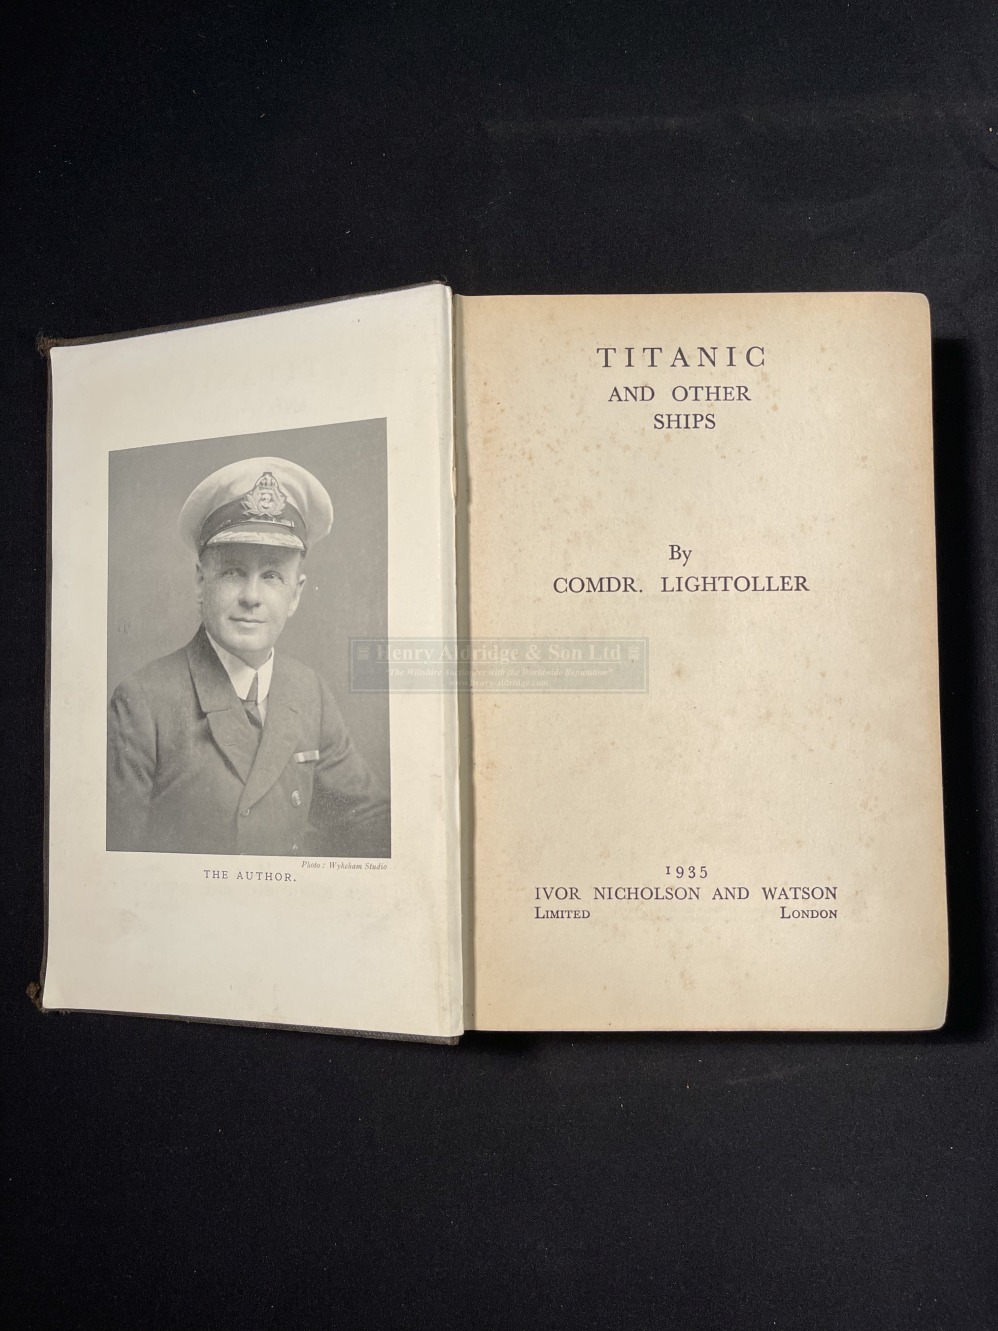 R.M.S. TITANIC: 1935 first edition of Titanic and Other Ships, loose spine. - Image 2 of 2